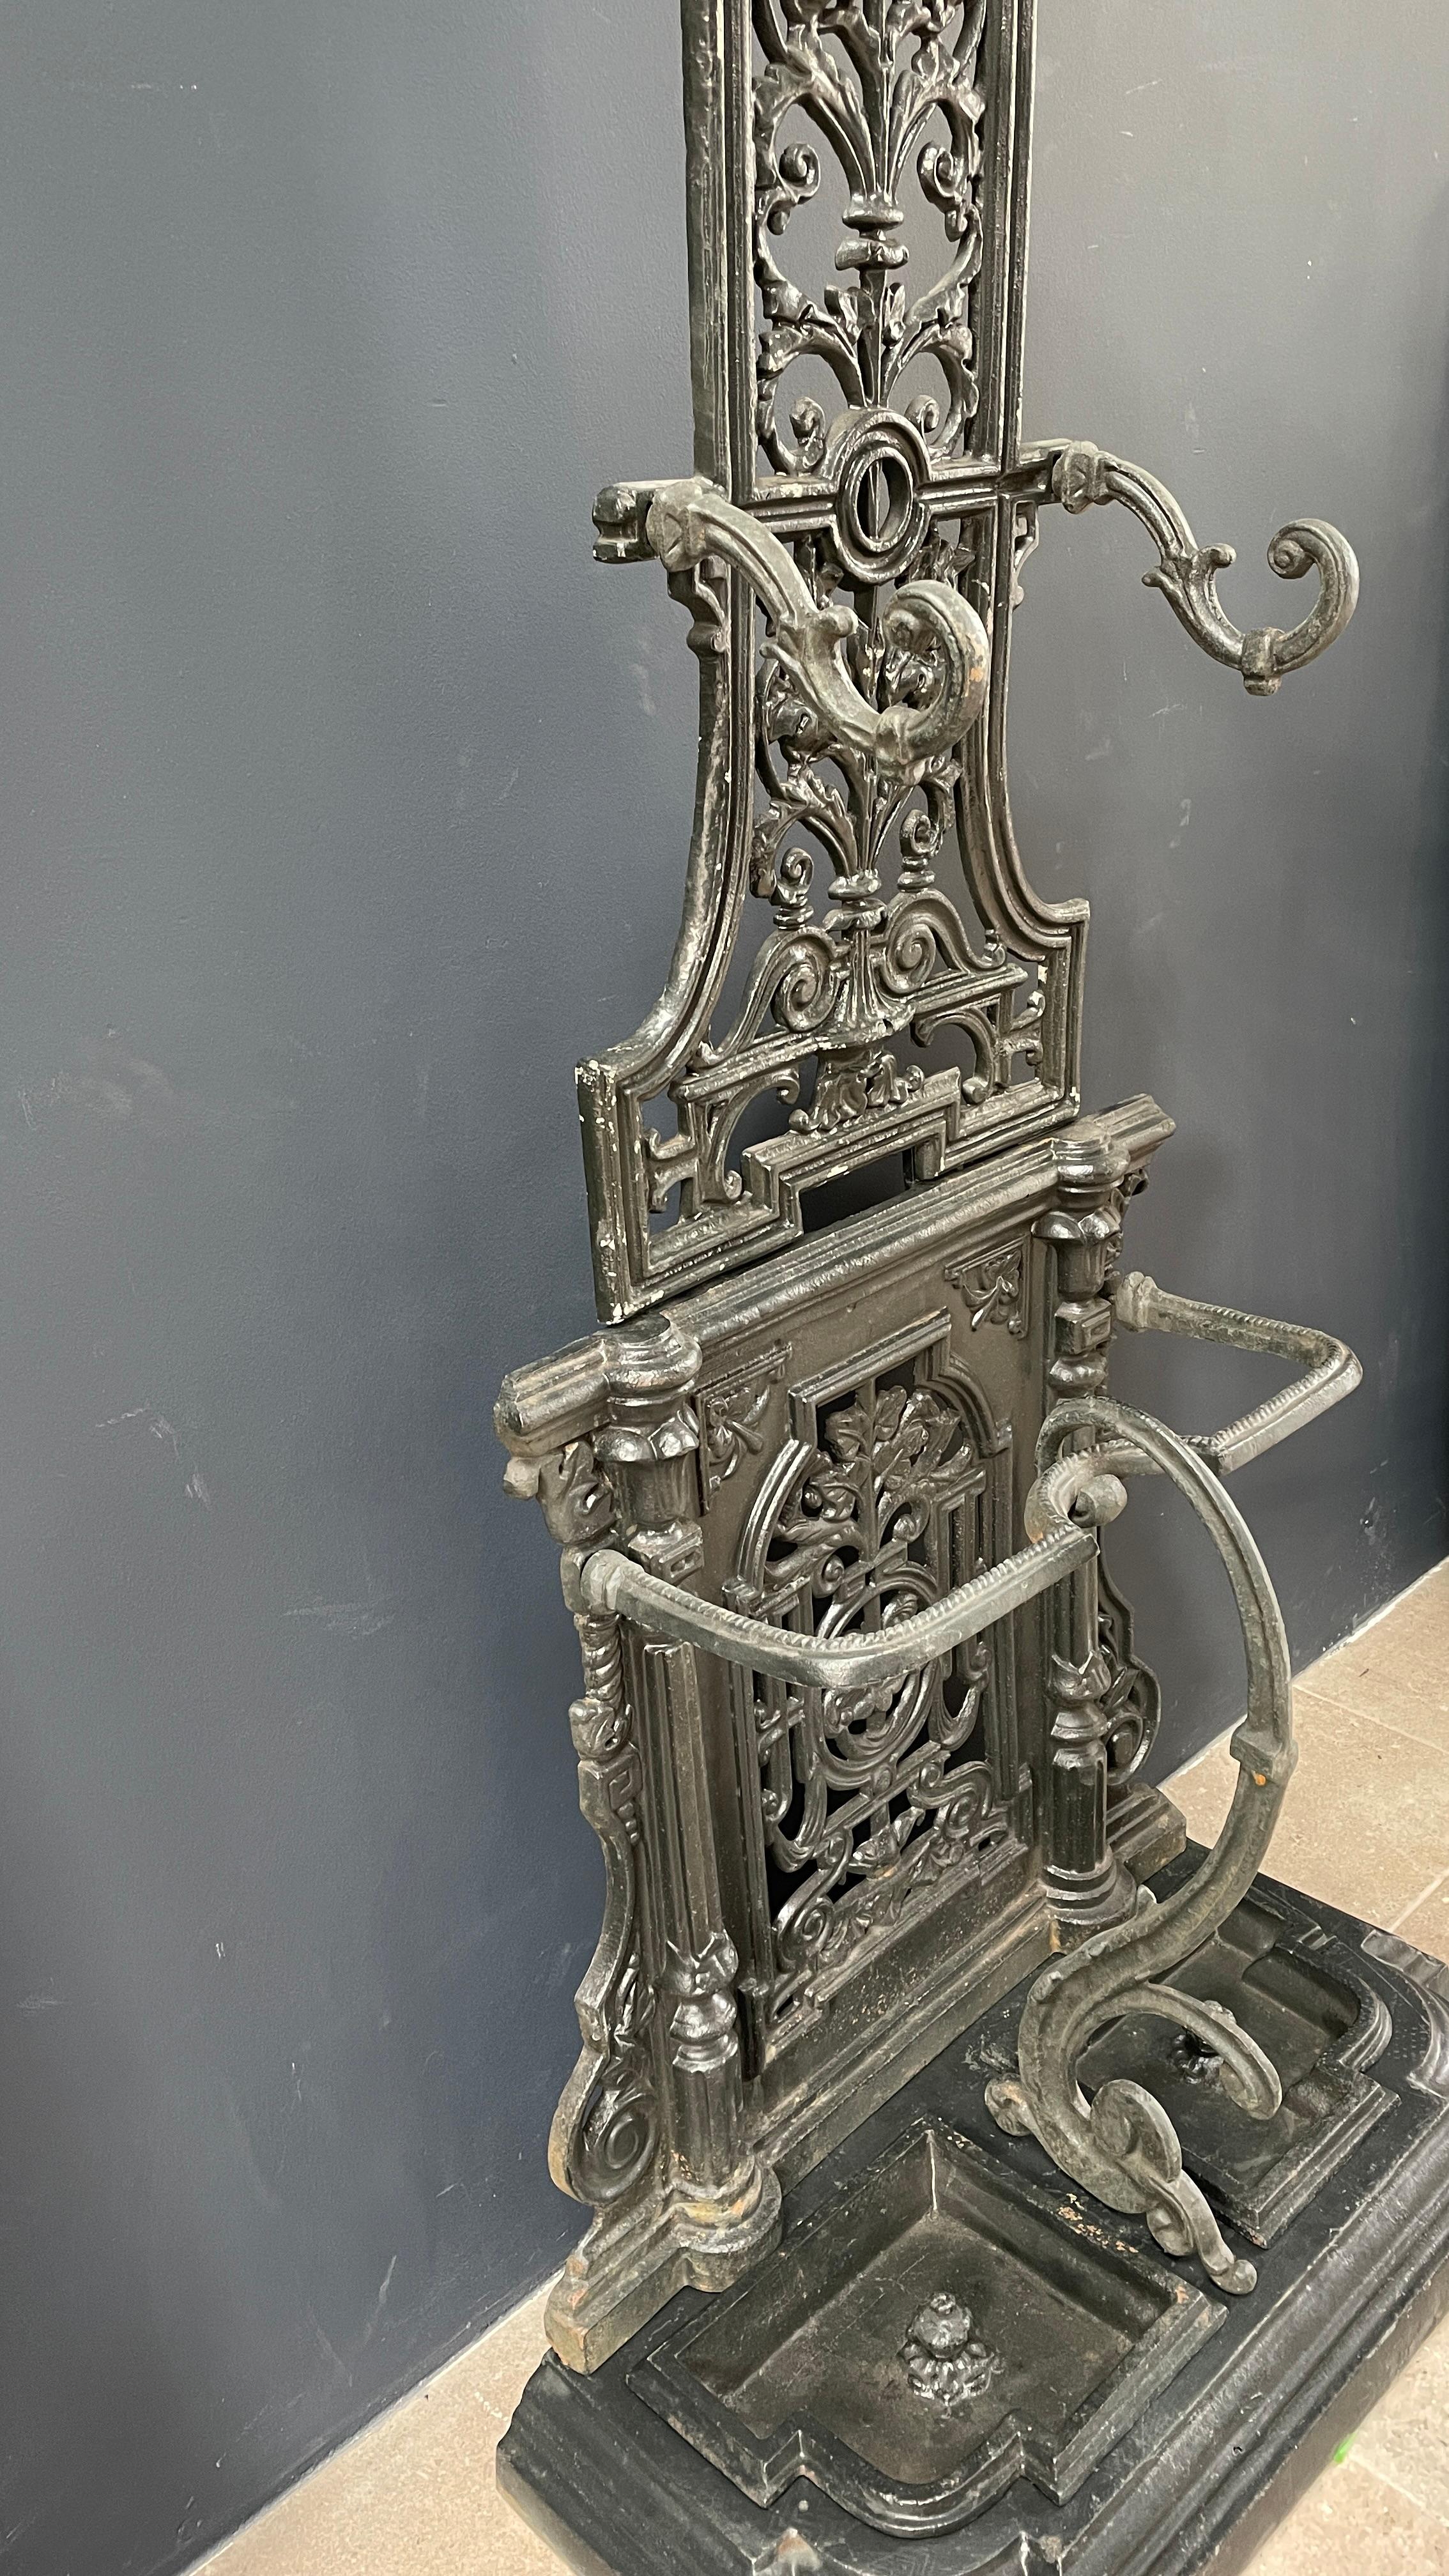 Beautiful coatrack or hat stand. This English rack is rich in detail and have a great patina. The top has hooks to put your coats on, the bottom has 2 umbrella stands with detachable cups to collect the draining water. This can be a great addition